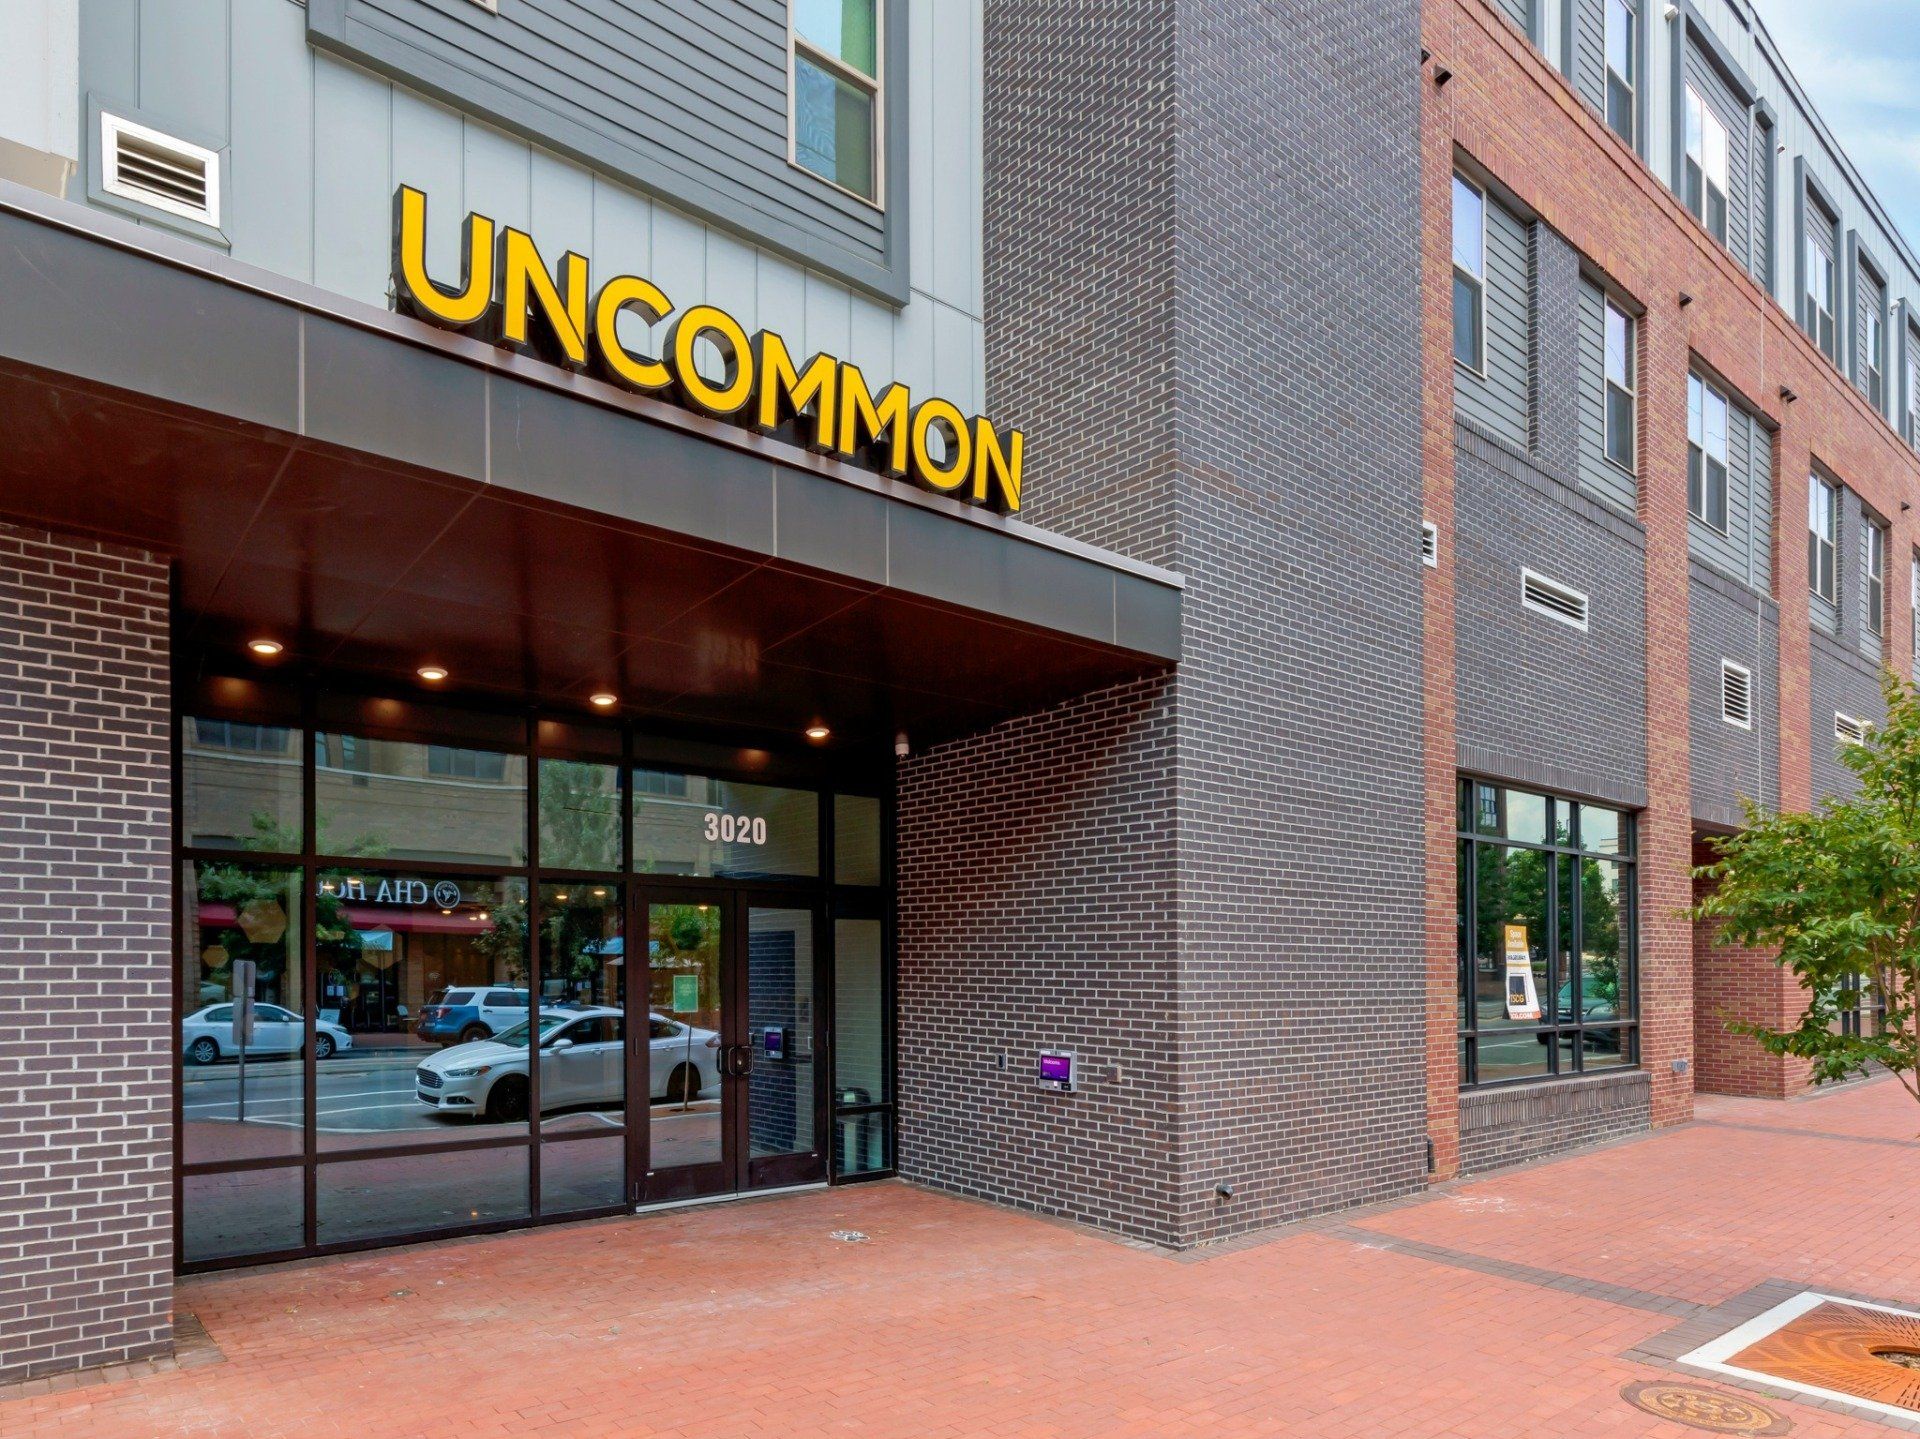 First Floor Retail at Uncommon Raleigh.